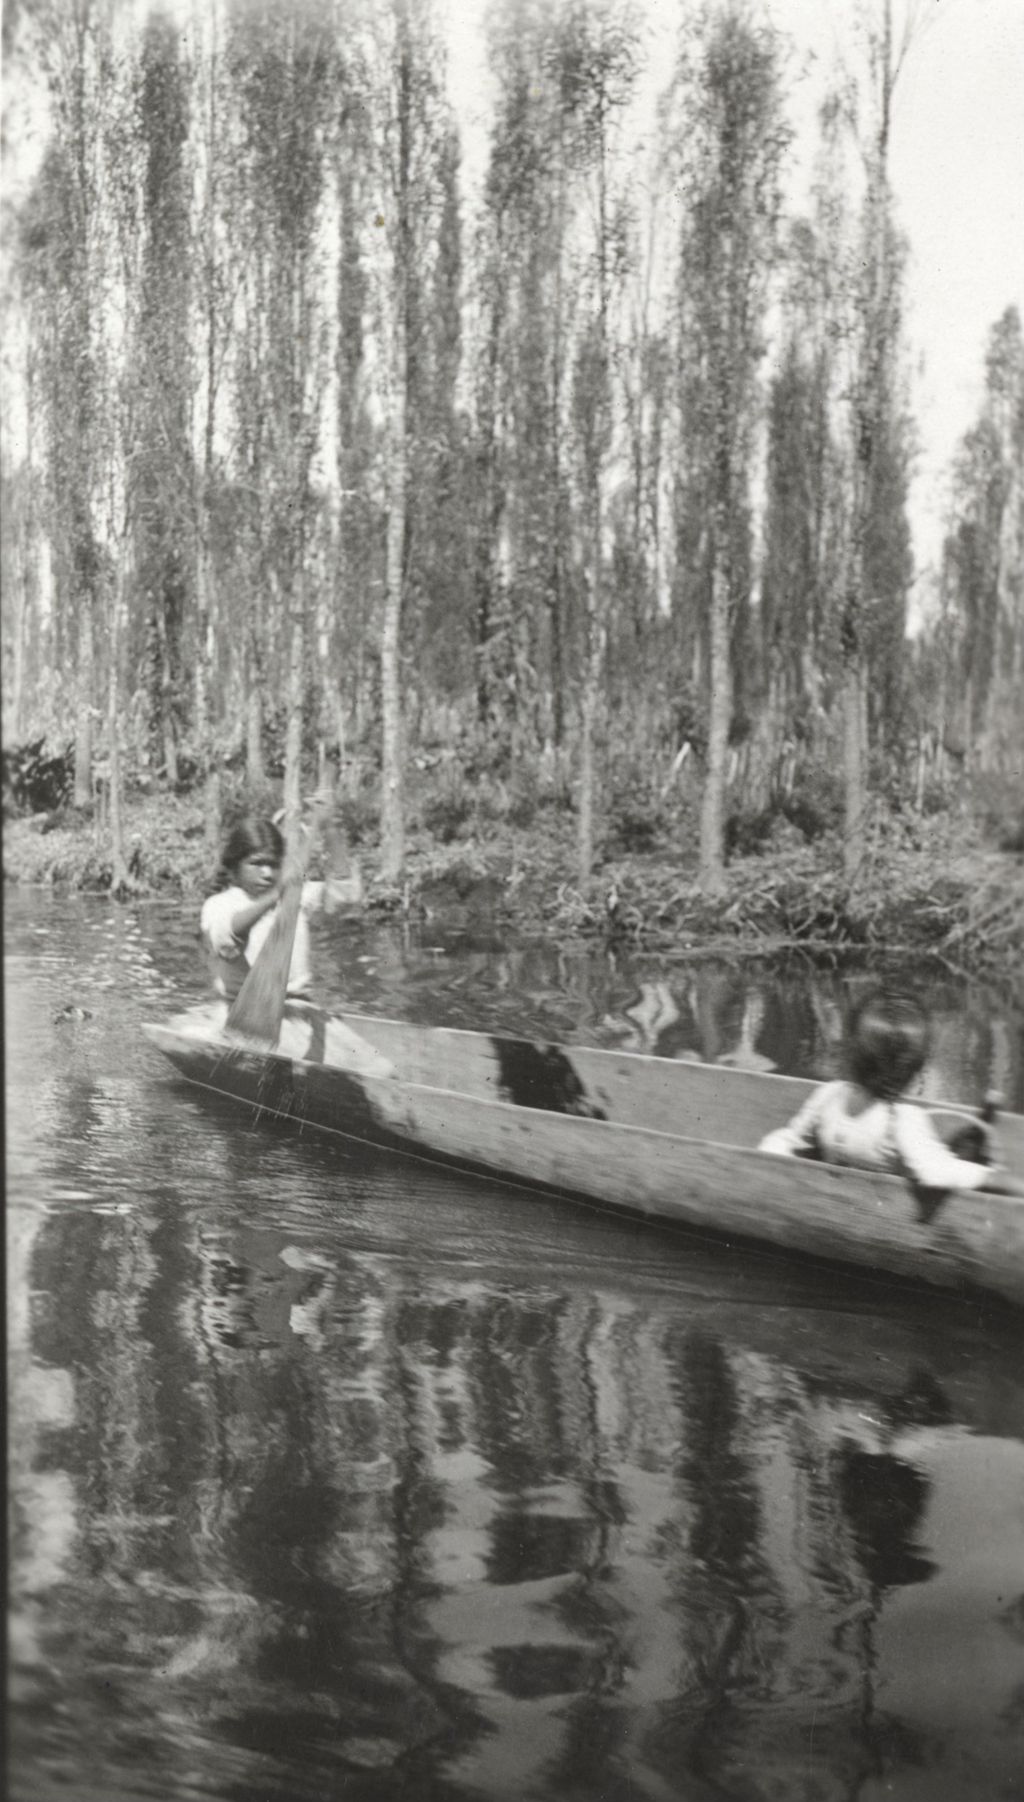 Two people in a dugout canoe photographed on Jane Addams' trip to Mexico